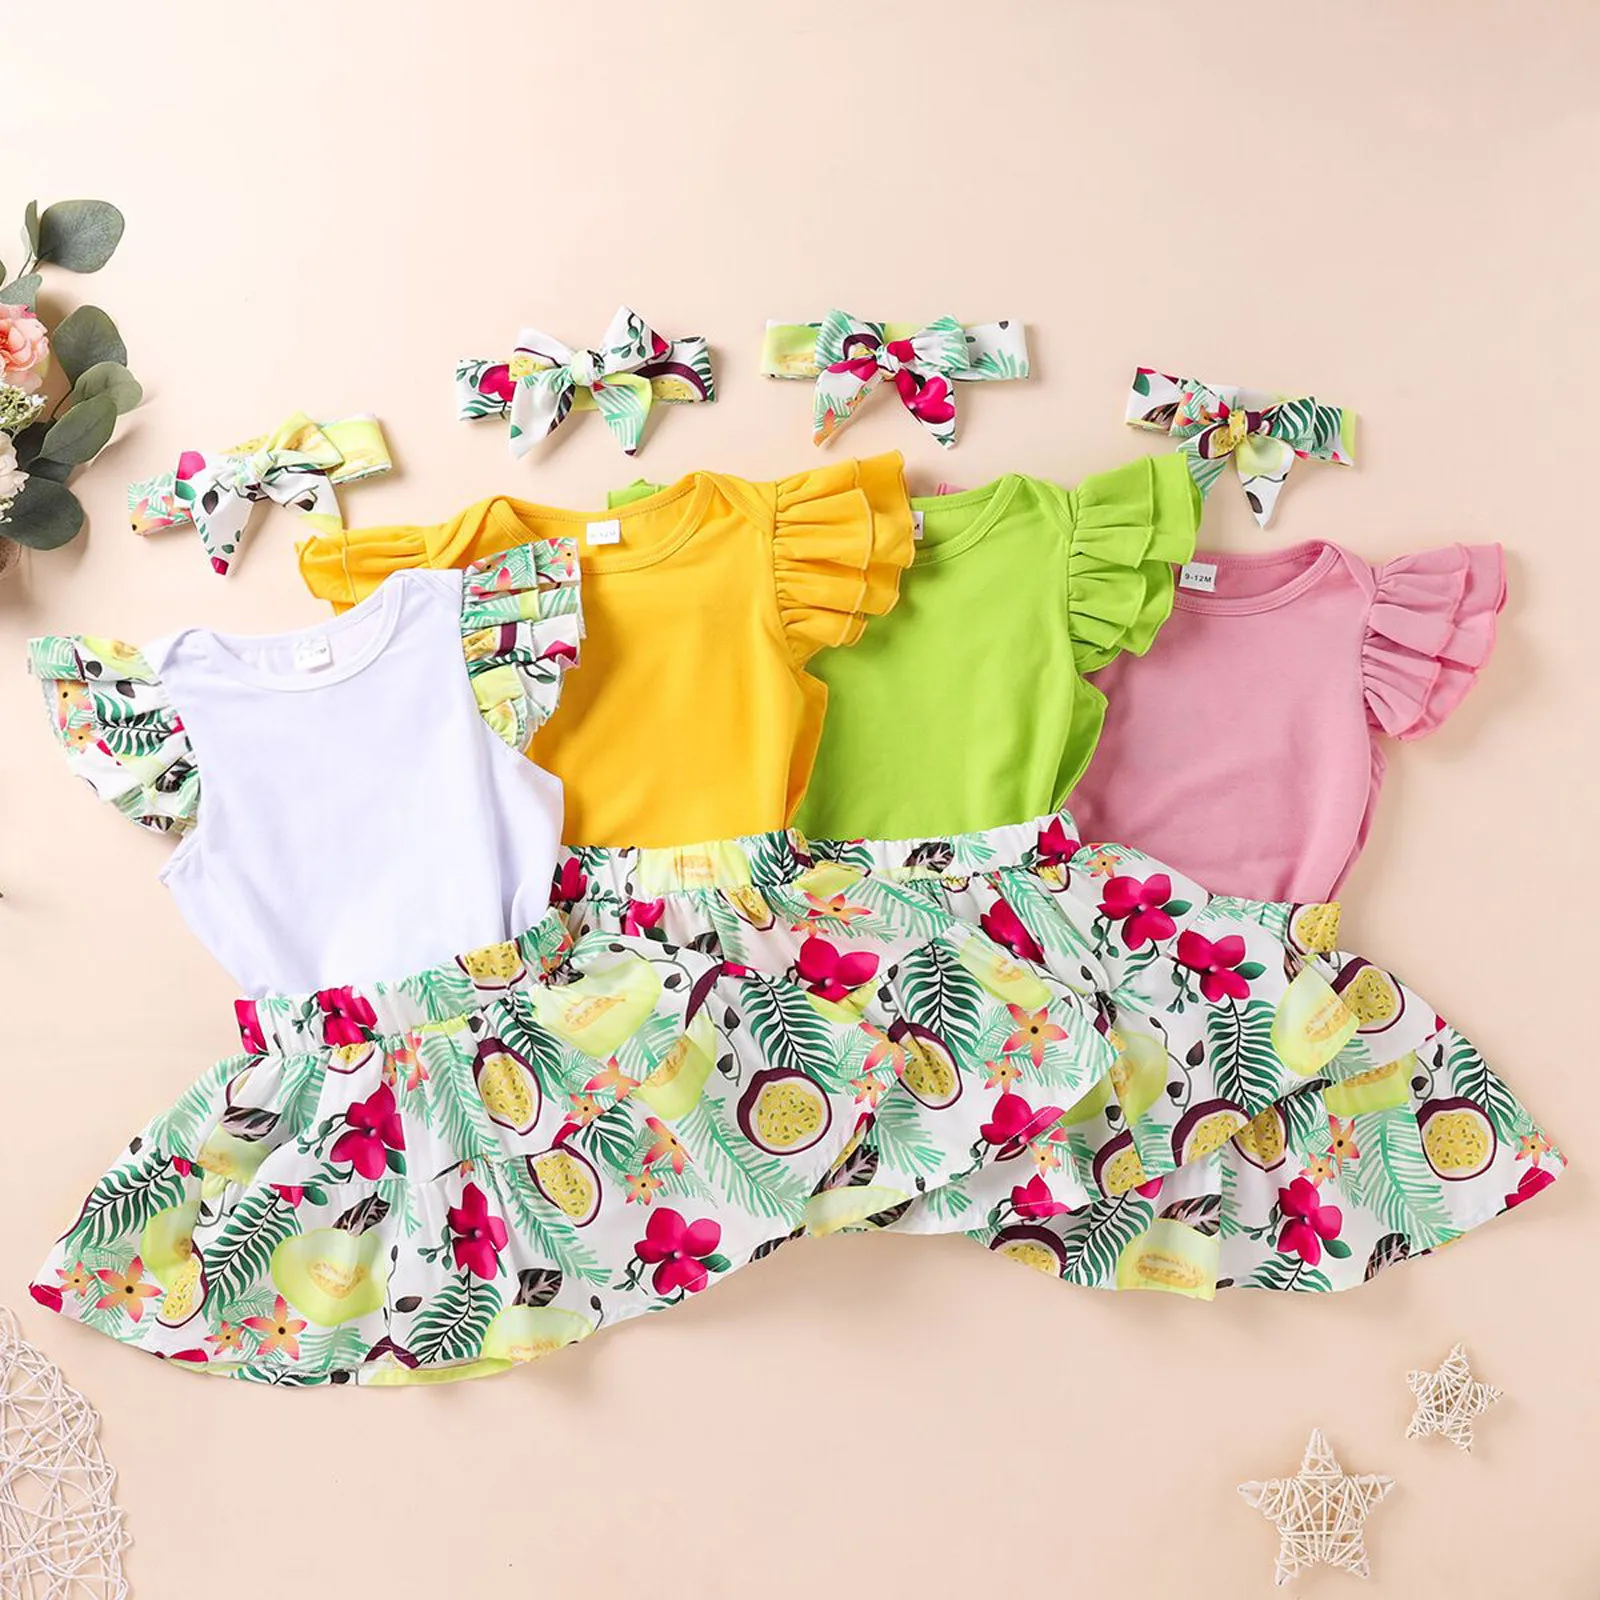 

Newborn Infant Baby Girls Fly Sleeve Romper Floral Skirt Hairband Outfits Sets Baby Girl Clothes ropa niÃ±a meisjes kleding